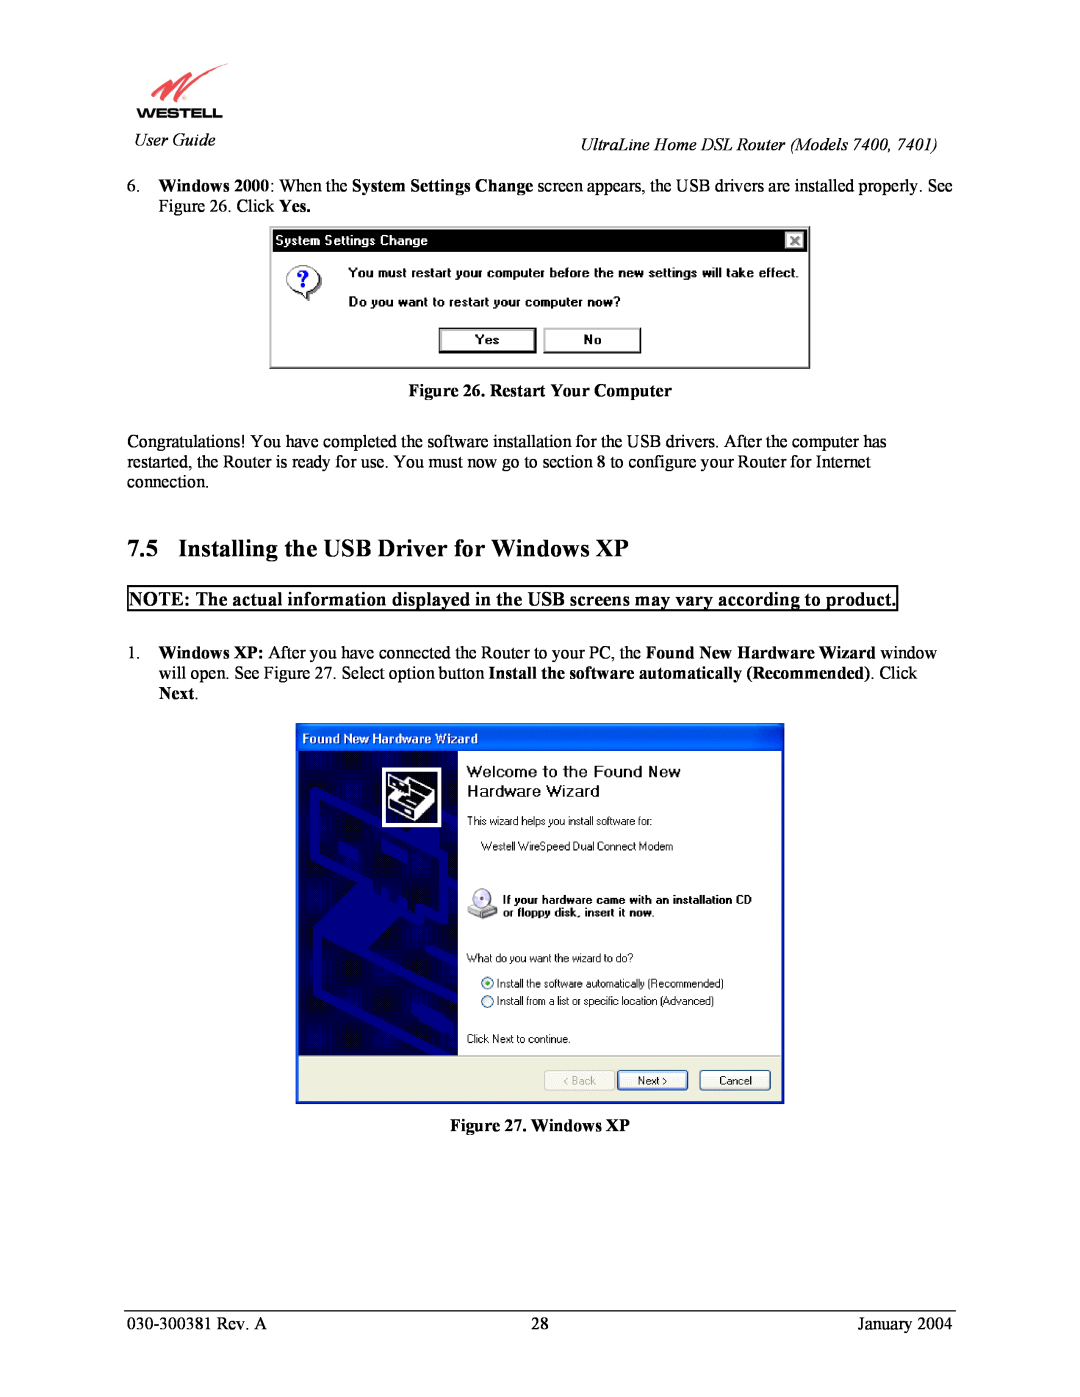 Westell Technologies 7401, 7400 manual Installing the USB Driver for Windows XP, Restart Your Computer 